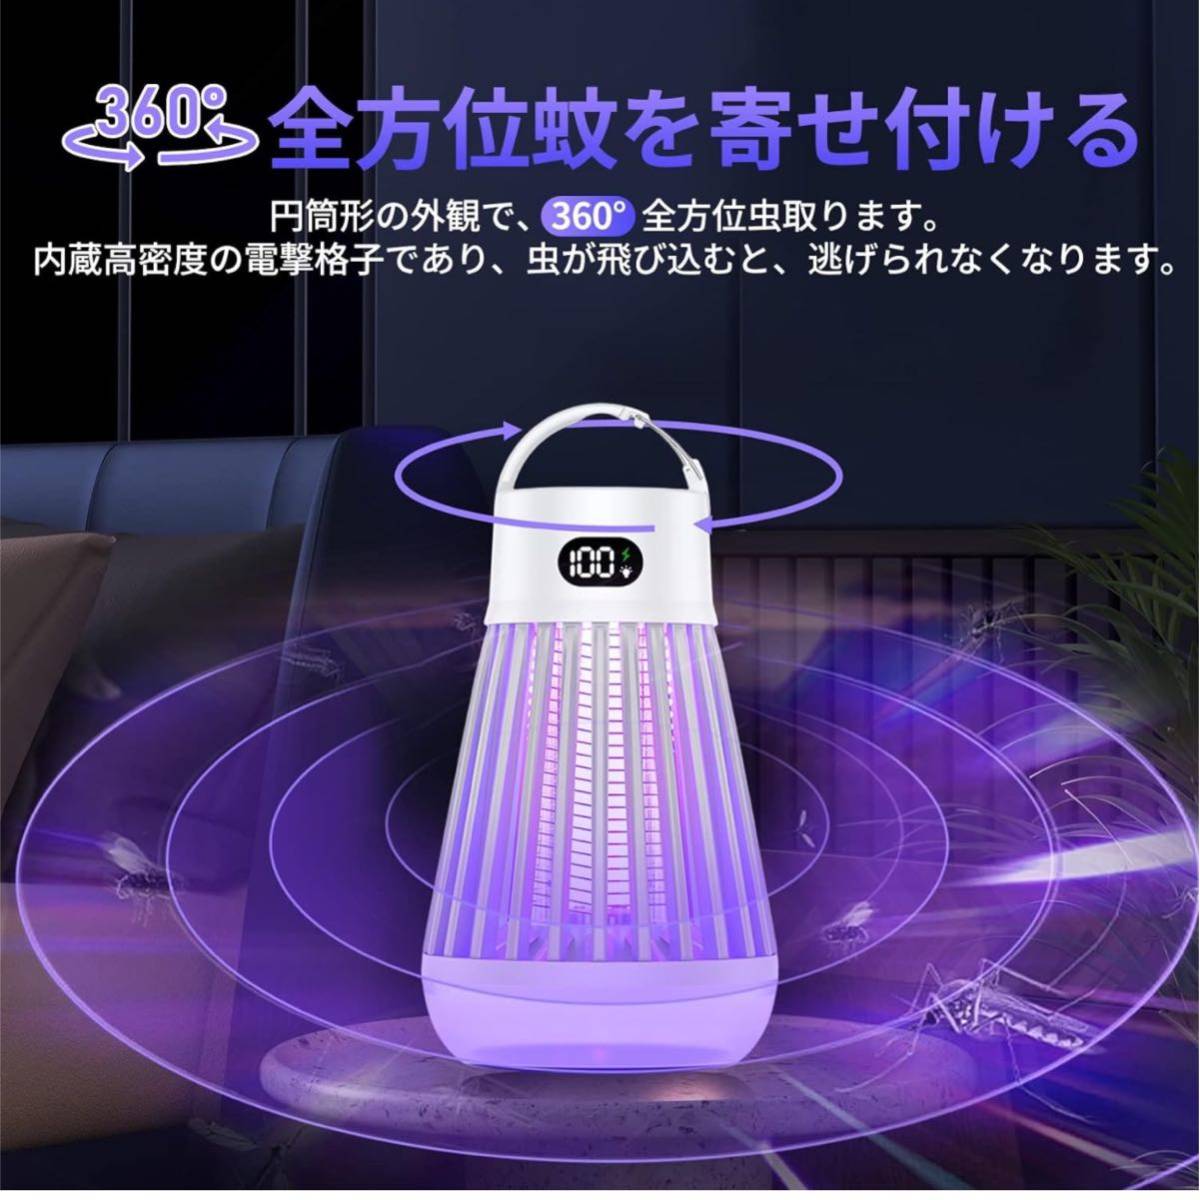 [ breaking the seal only ]Justchee * multifunction light trap electric bug killer electric mosquito repellent vessel . insect vessel electric shock light trap lighting light with function indoor & outdoor both for type ( white )